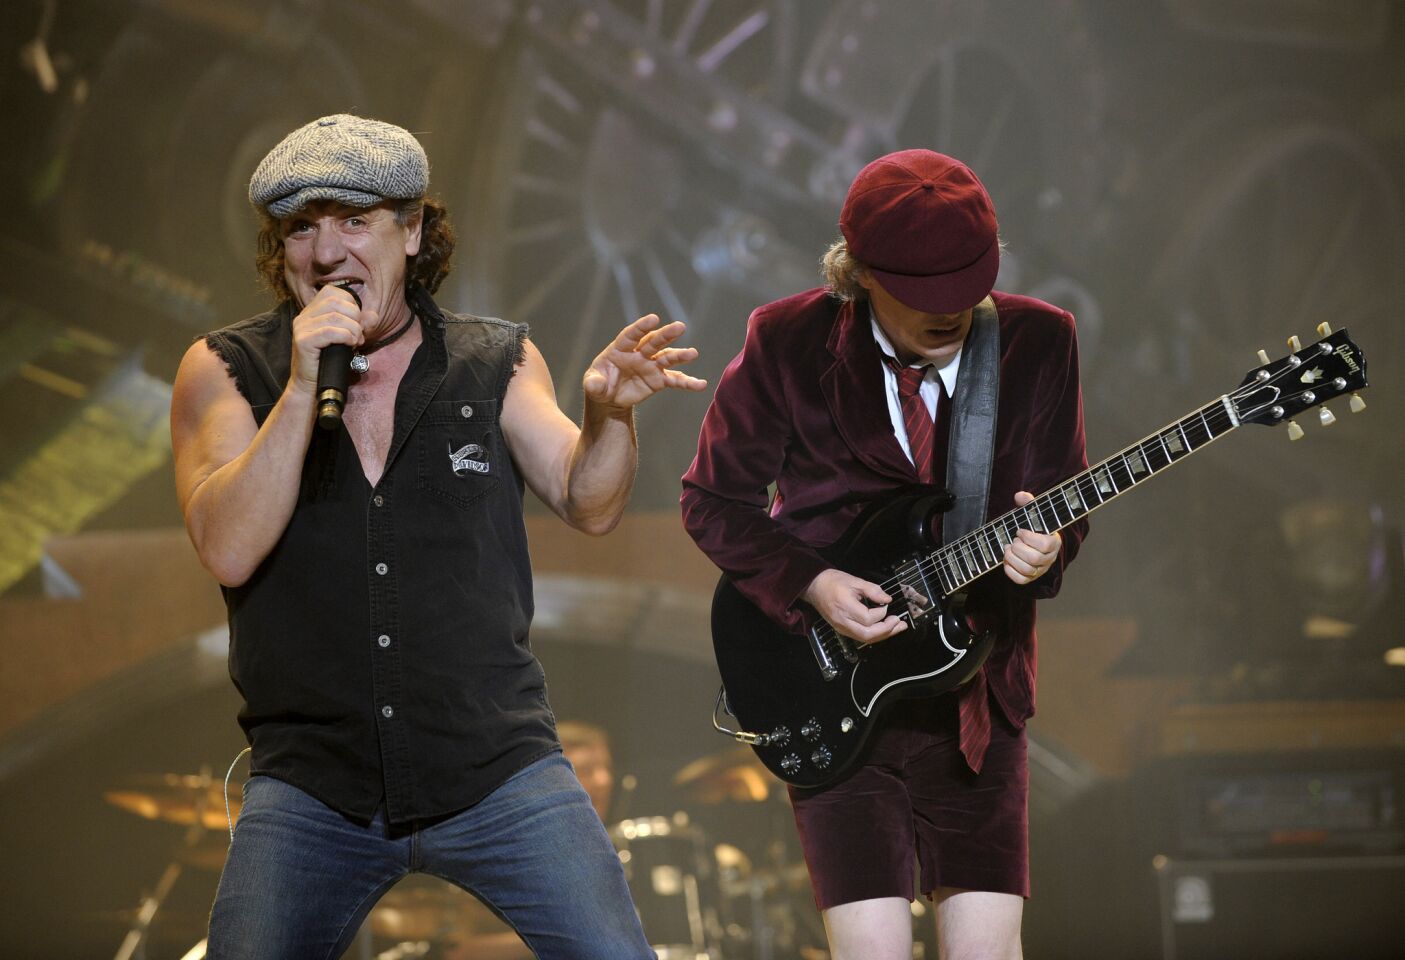 AC/DC, who will perform during the live telecast, has received seven nominations, winning a Grammy in 2010 for hard rock performance.